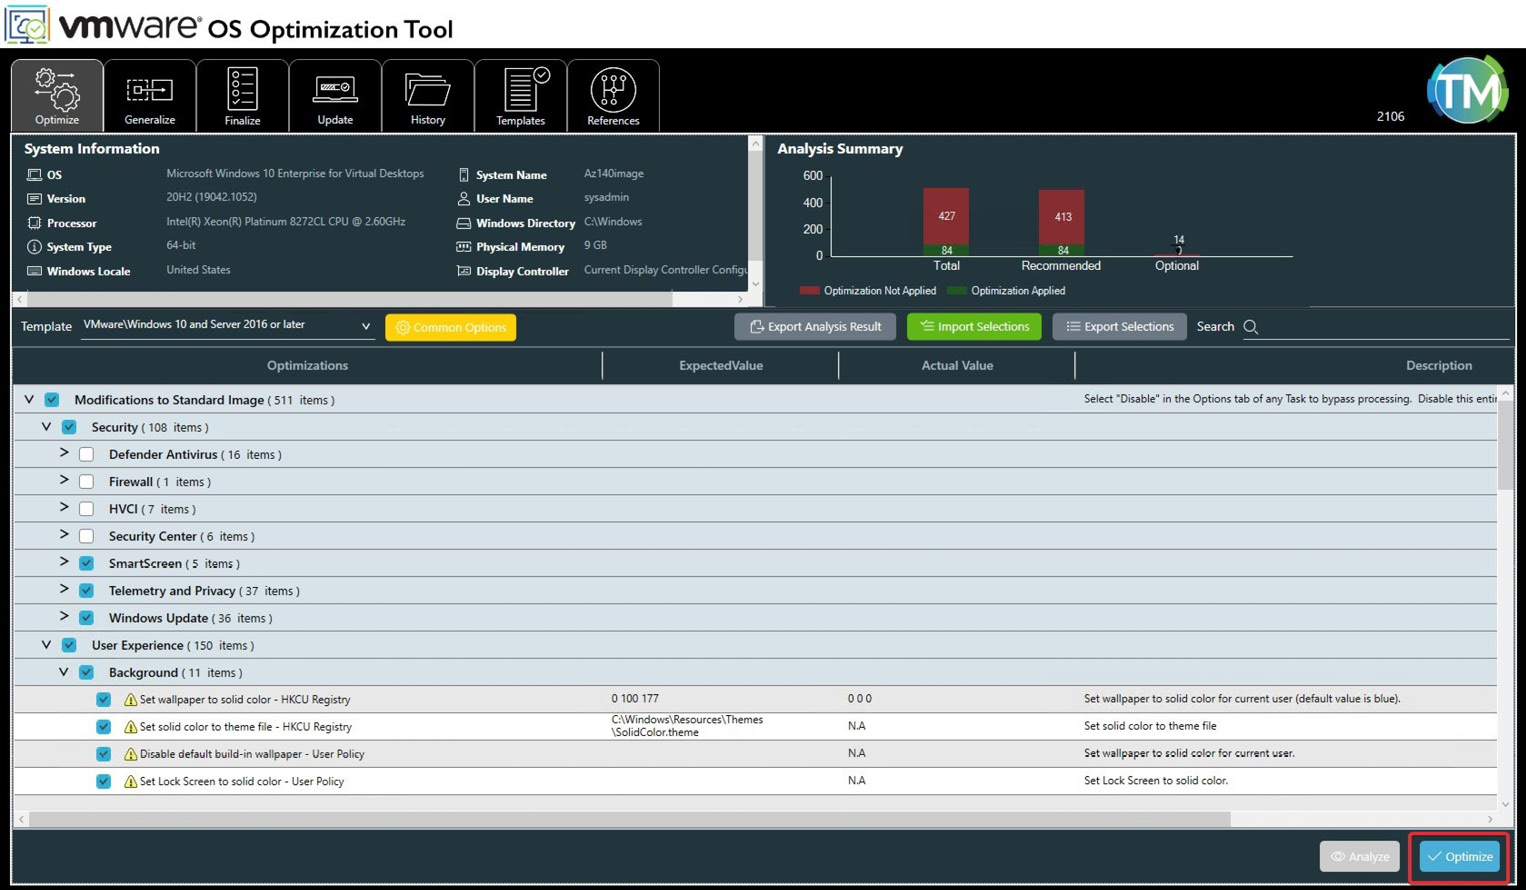 Figure 9.13 – The Analyze page of the VMware OS Optimization Tool